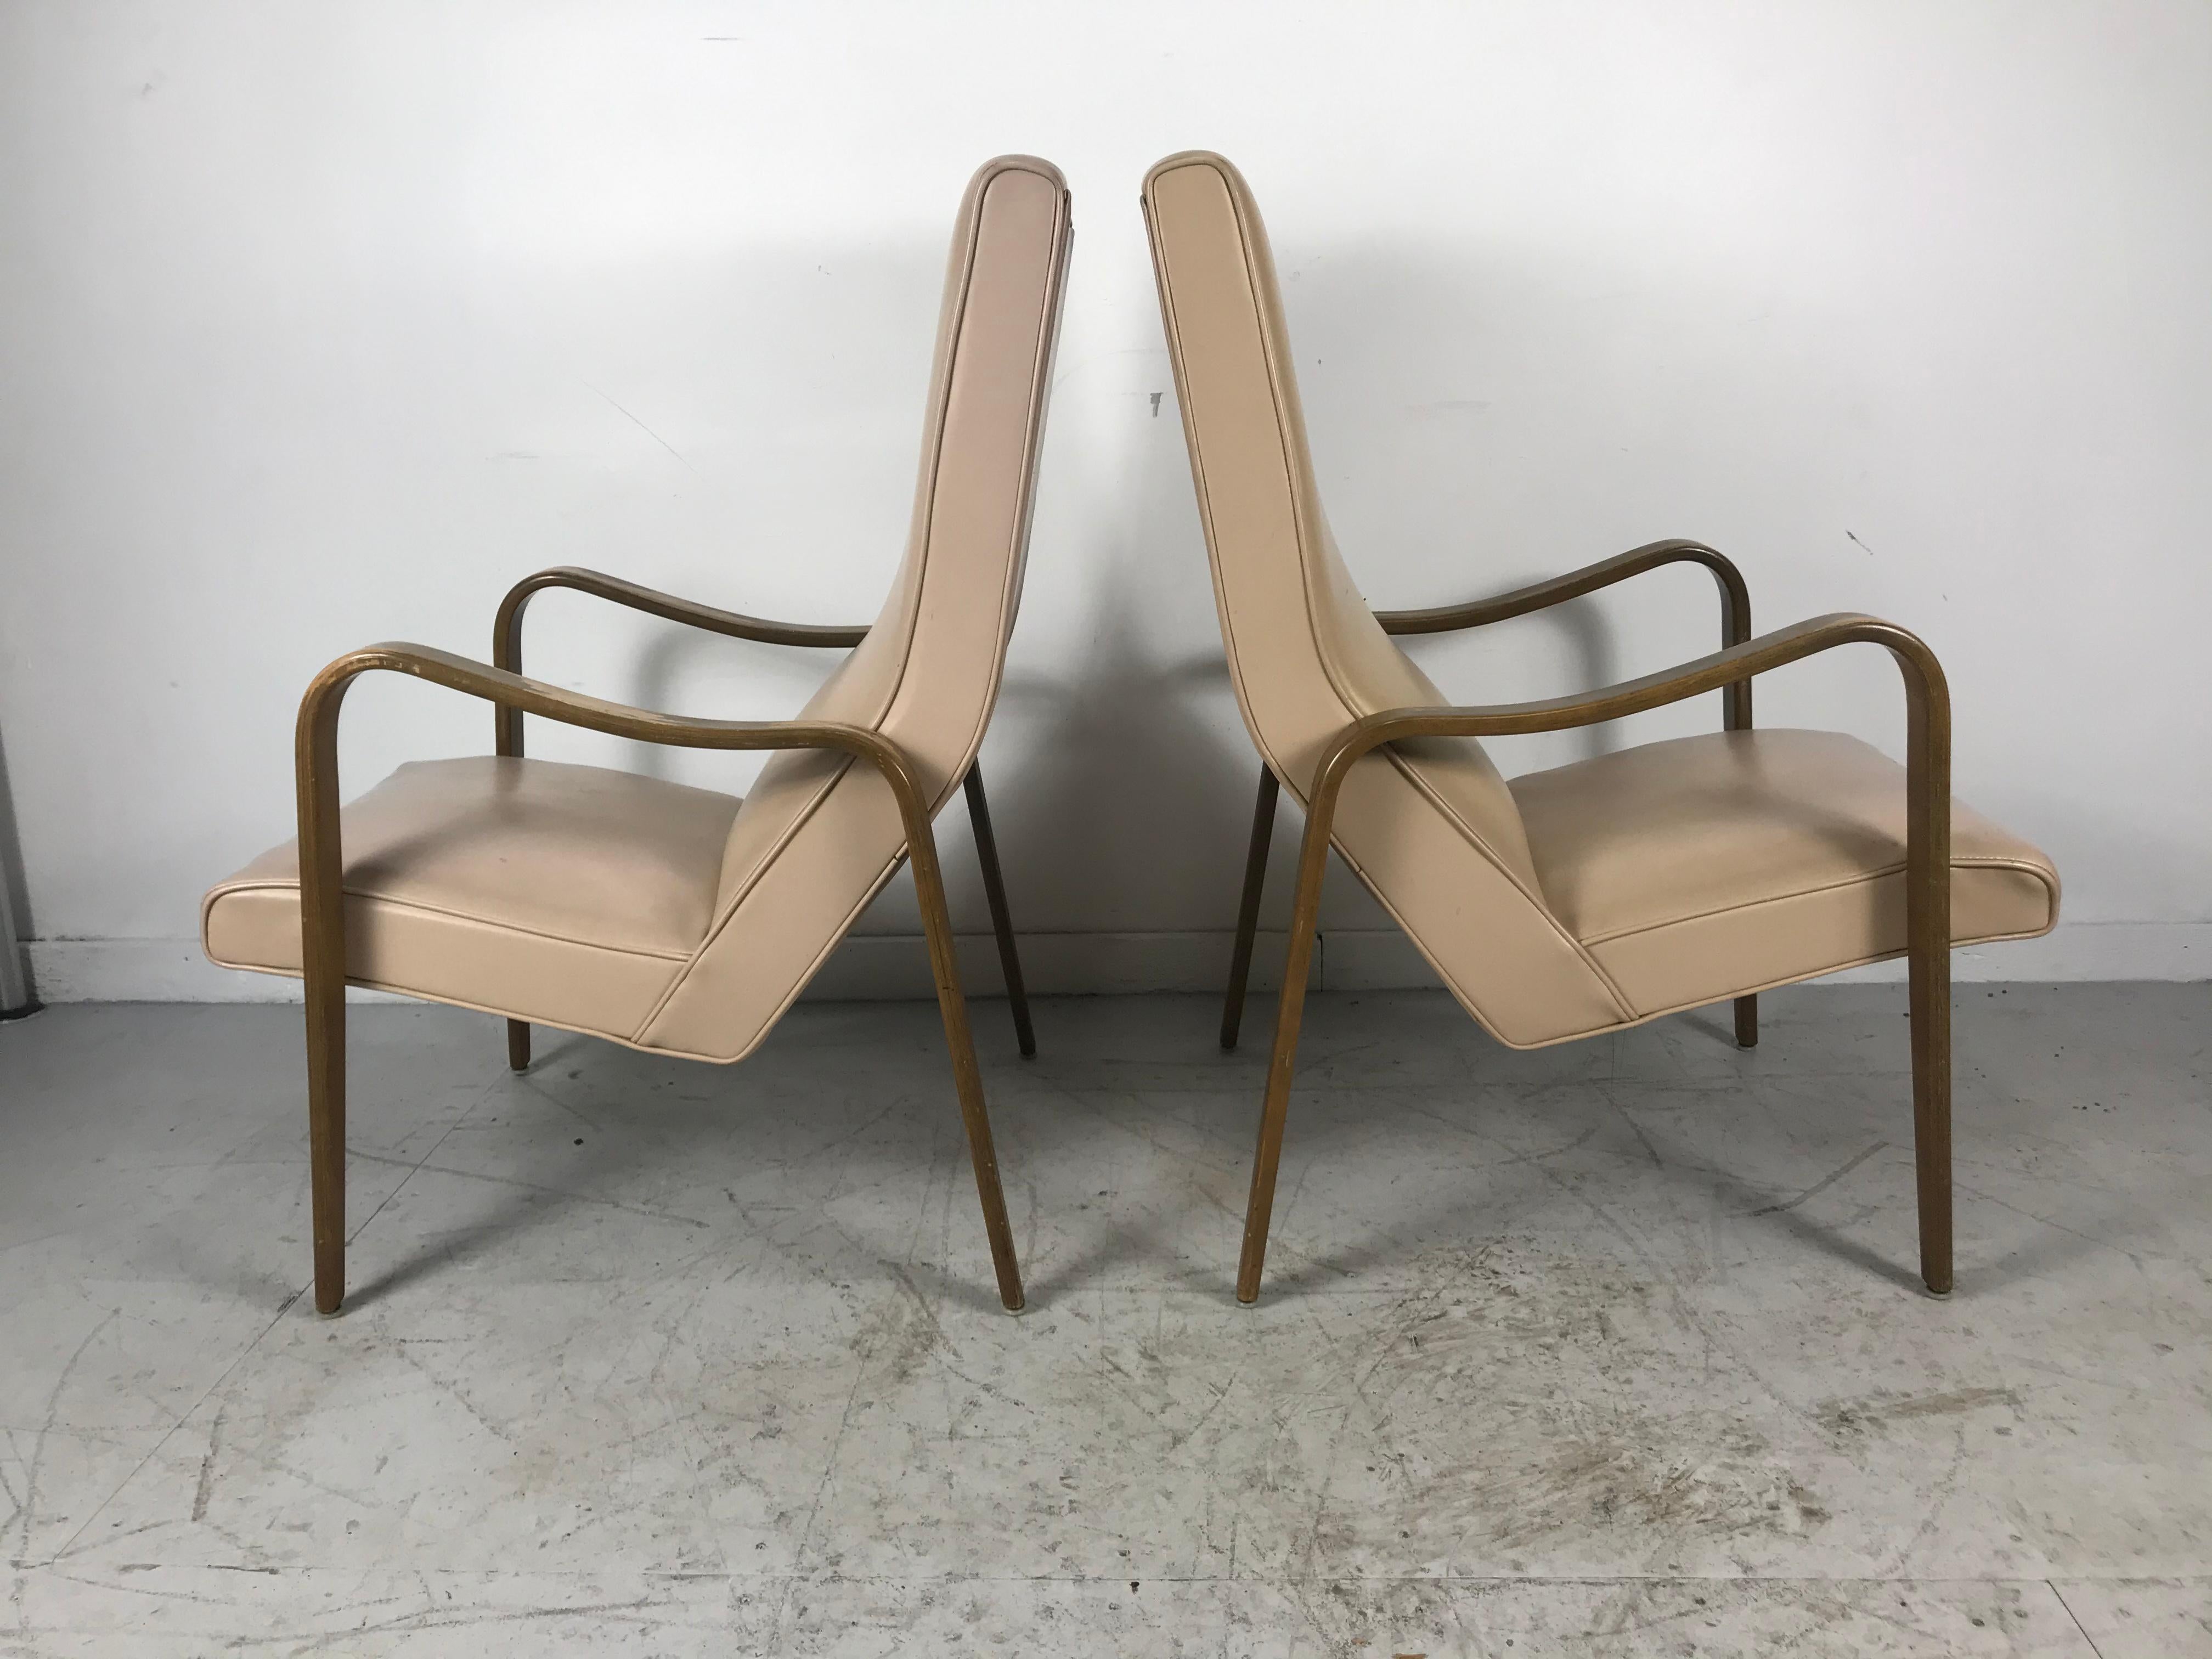 Pair of Classic Mid-Century Modern Bentwood Lounge Chairs by Thonet In Good Condition For Sale In Buffalo, NY